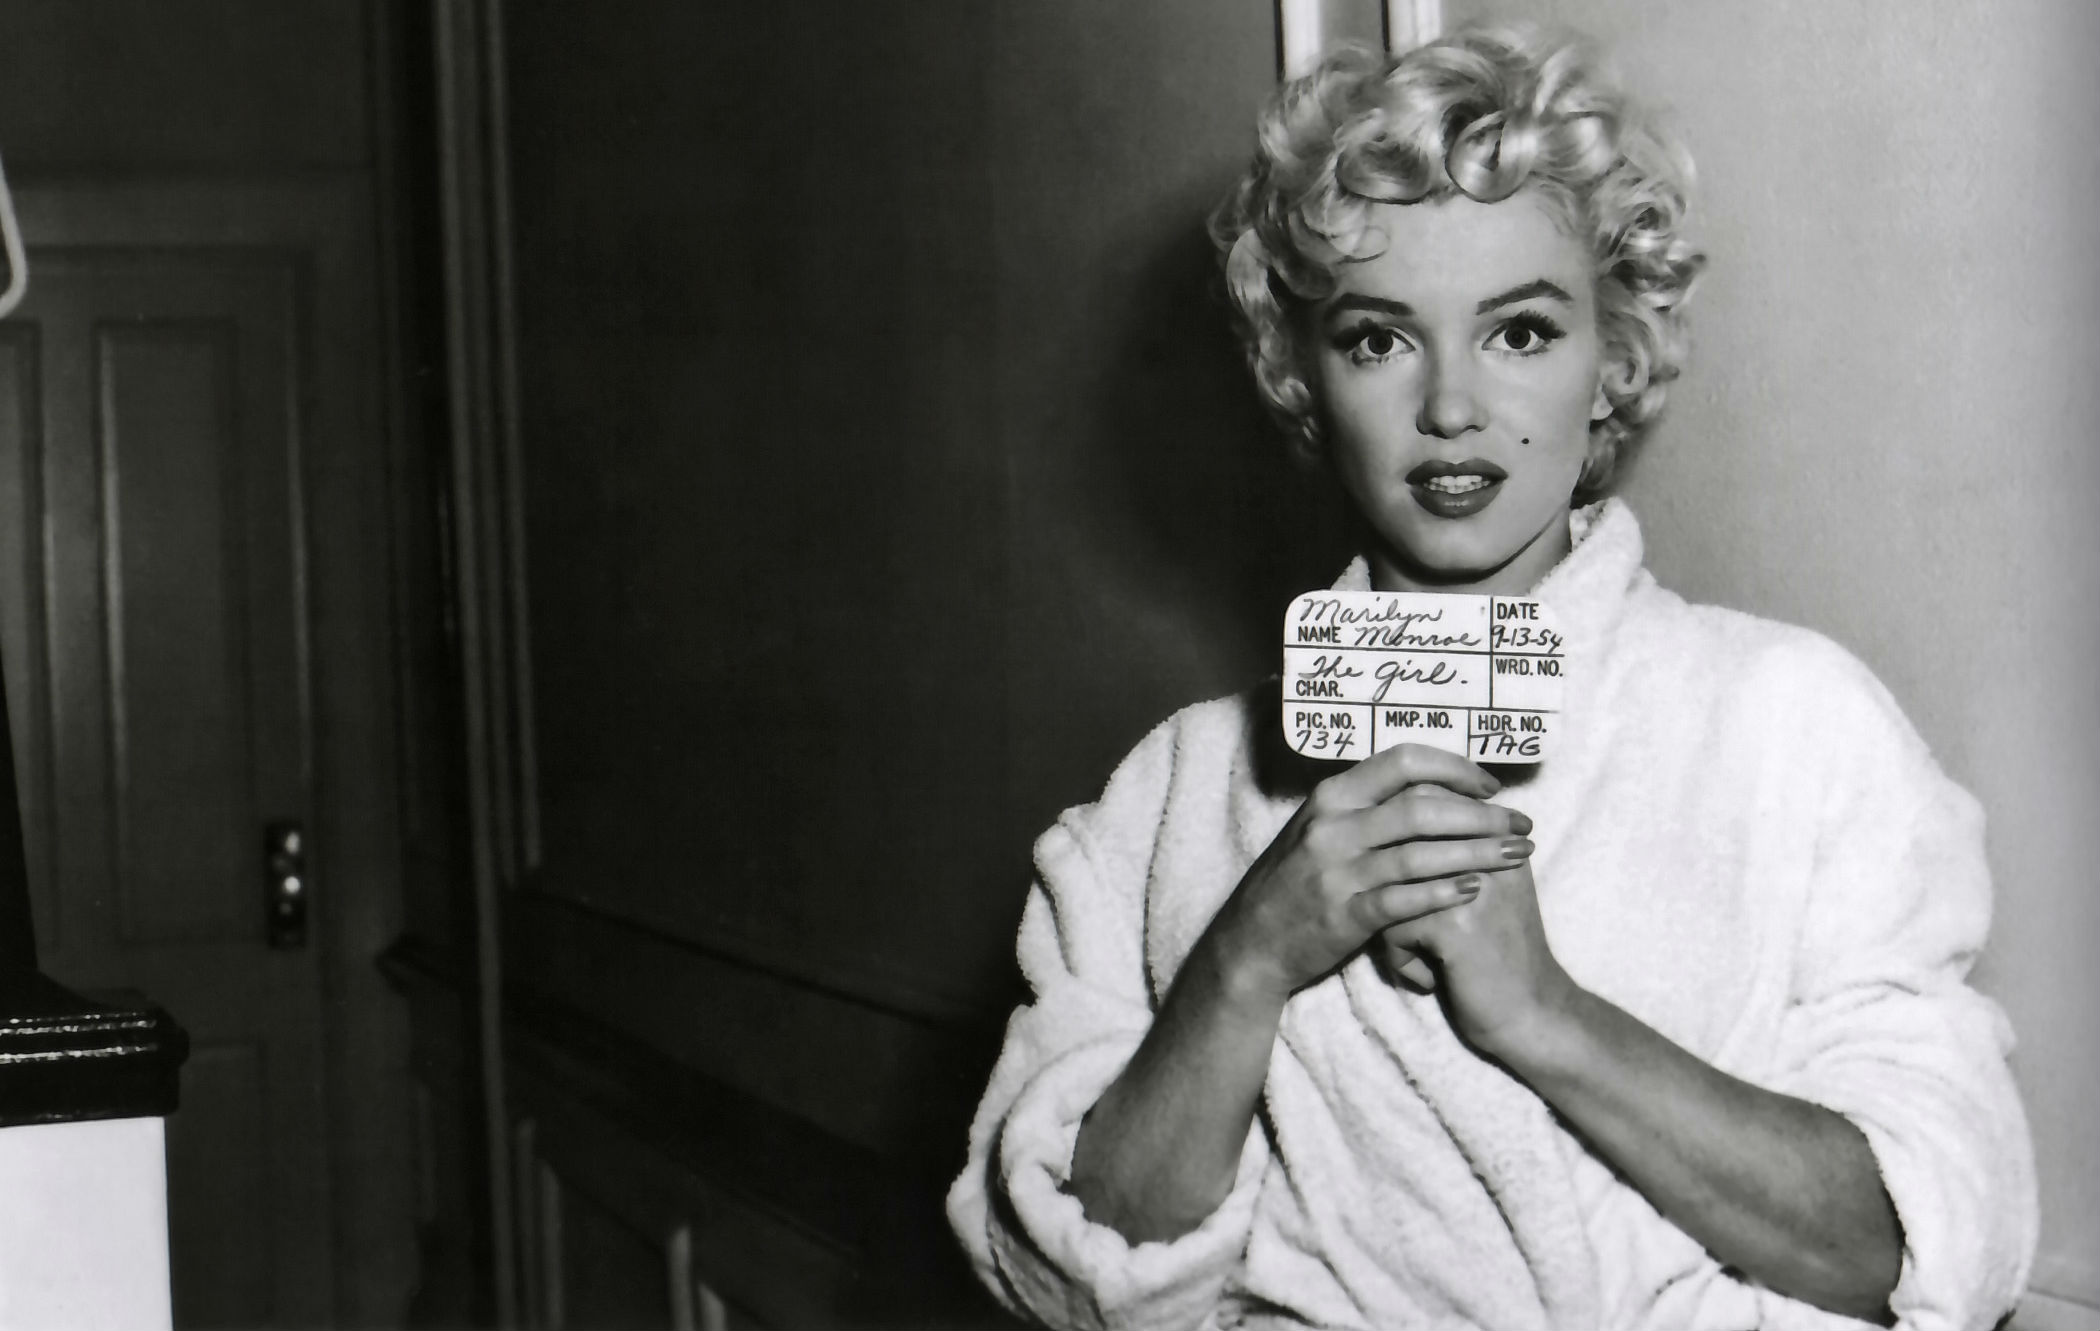 A behind the scenes shot of Marilyn Monroe holding a clapperboard - Marilyn Monroe